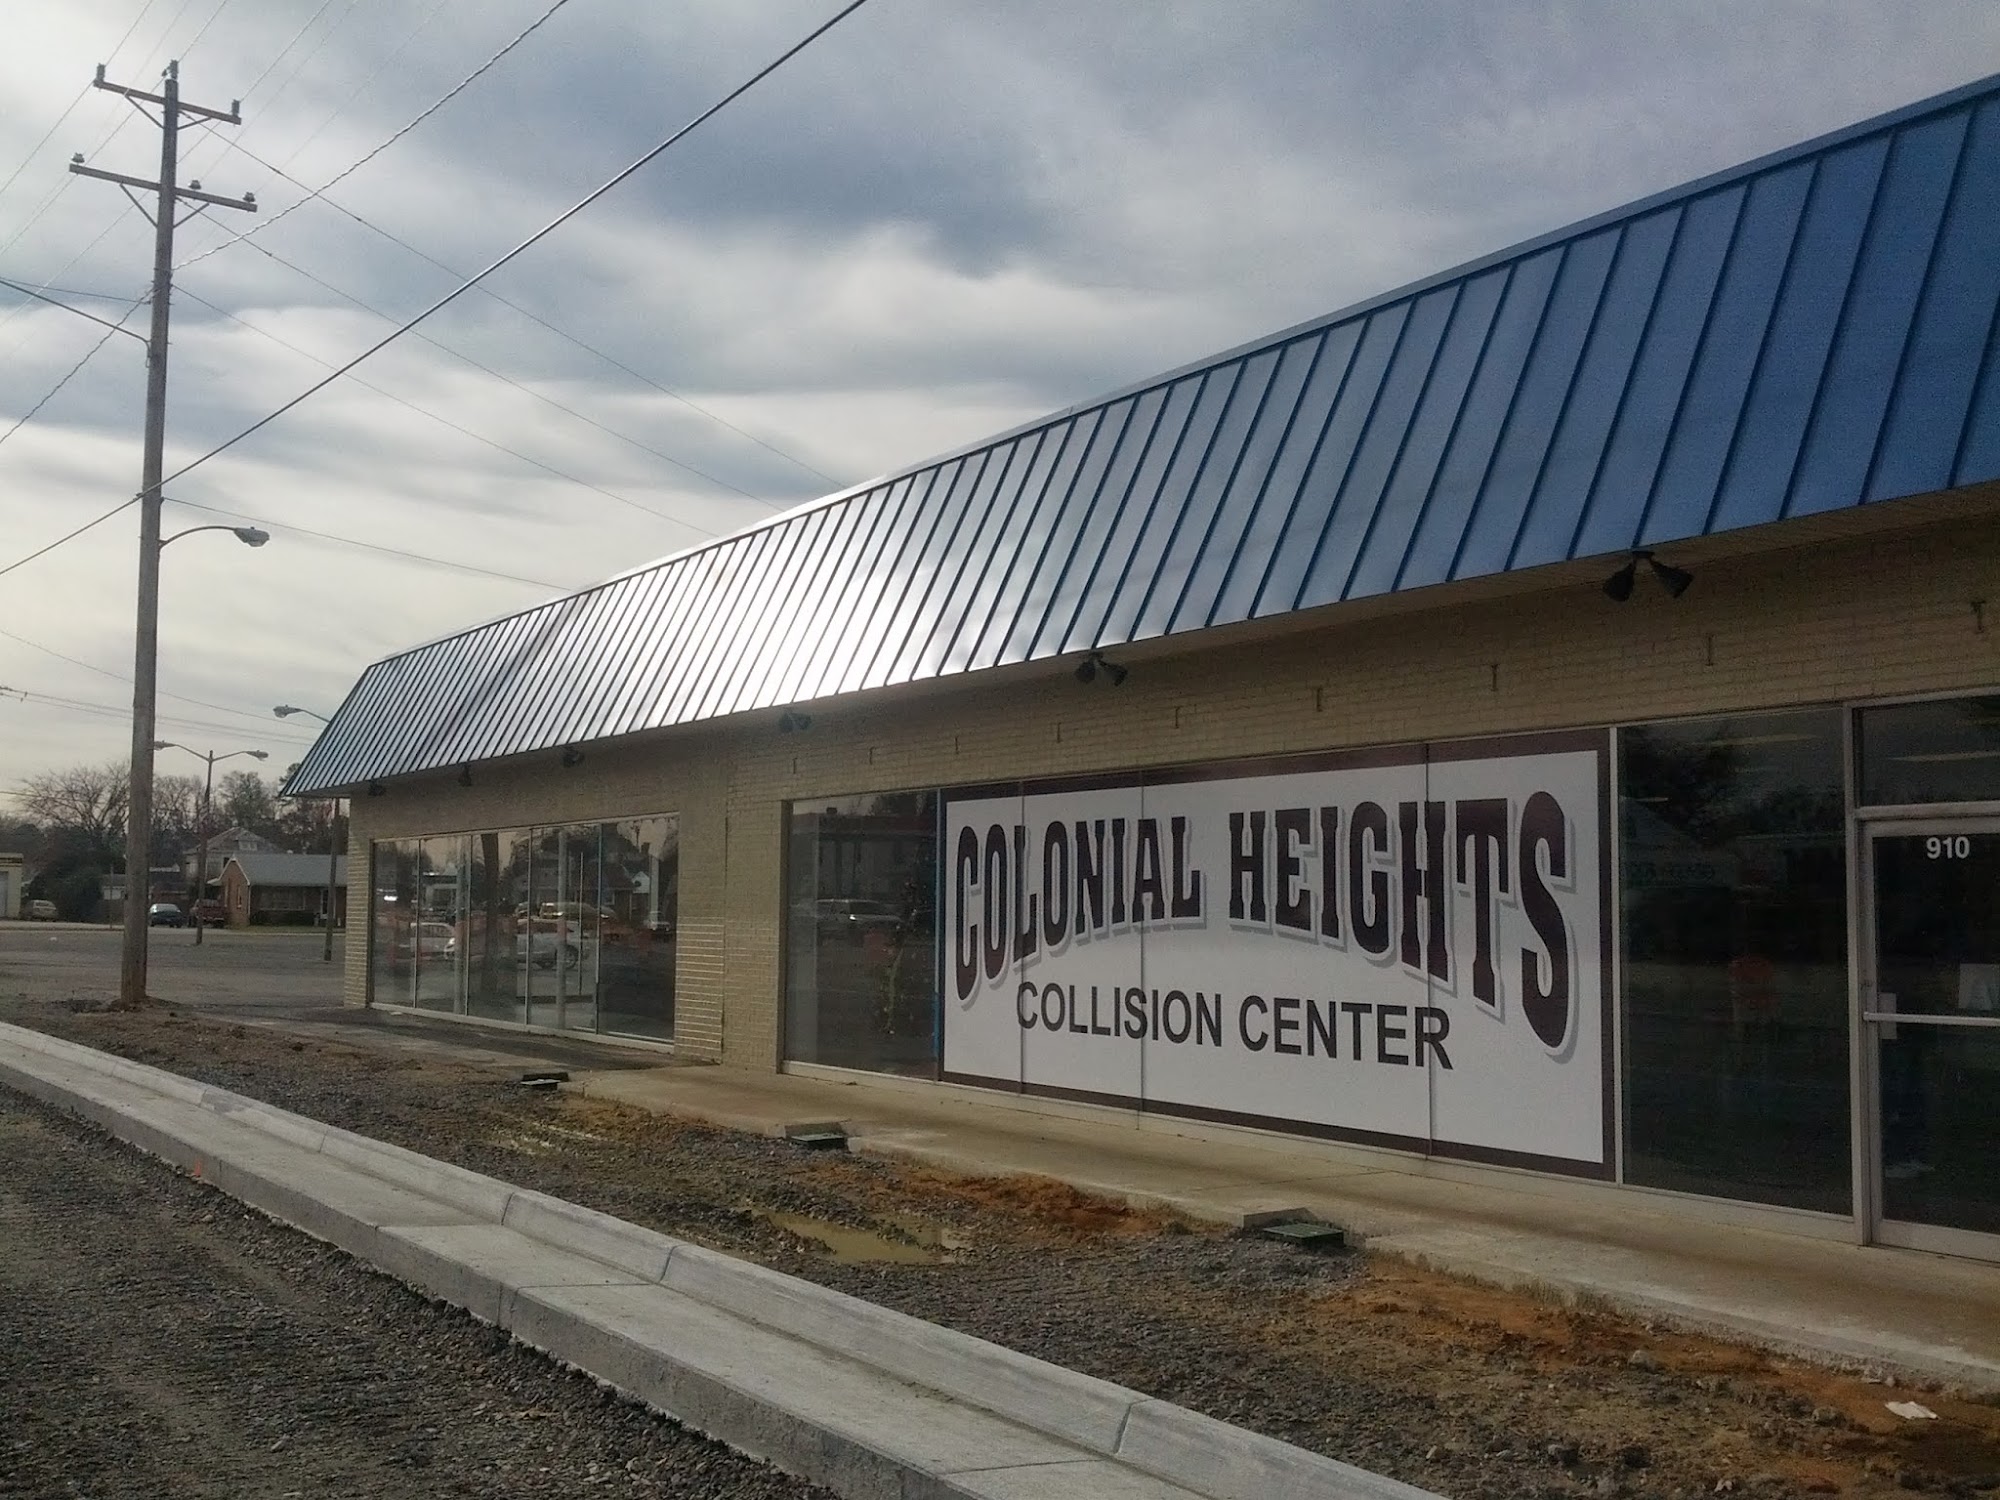 Colonial Heights Collision Center